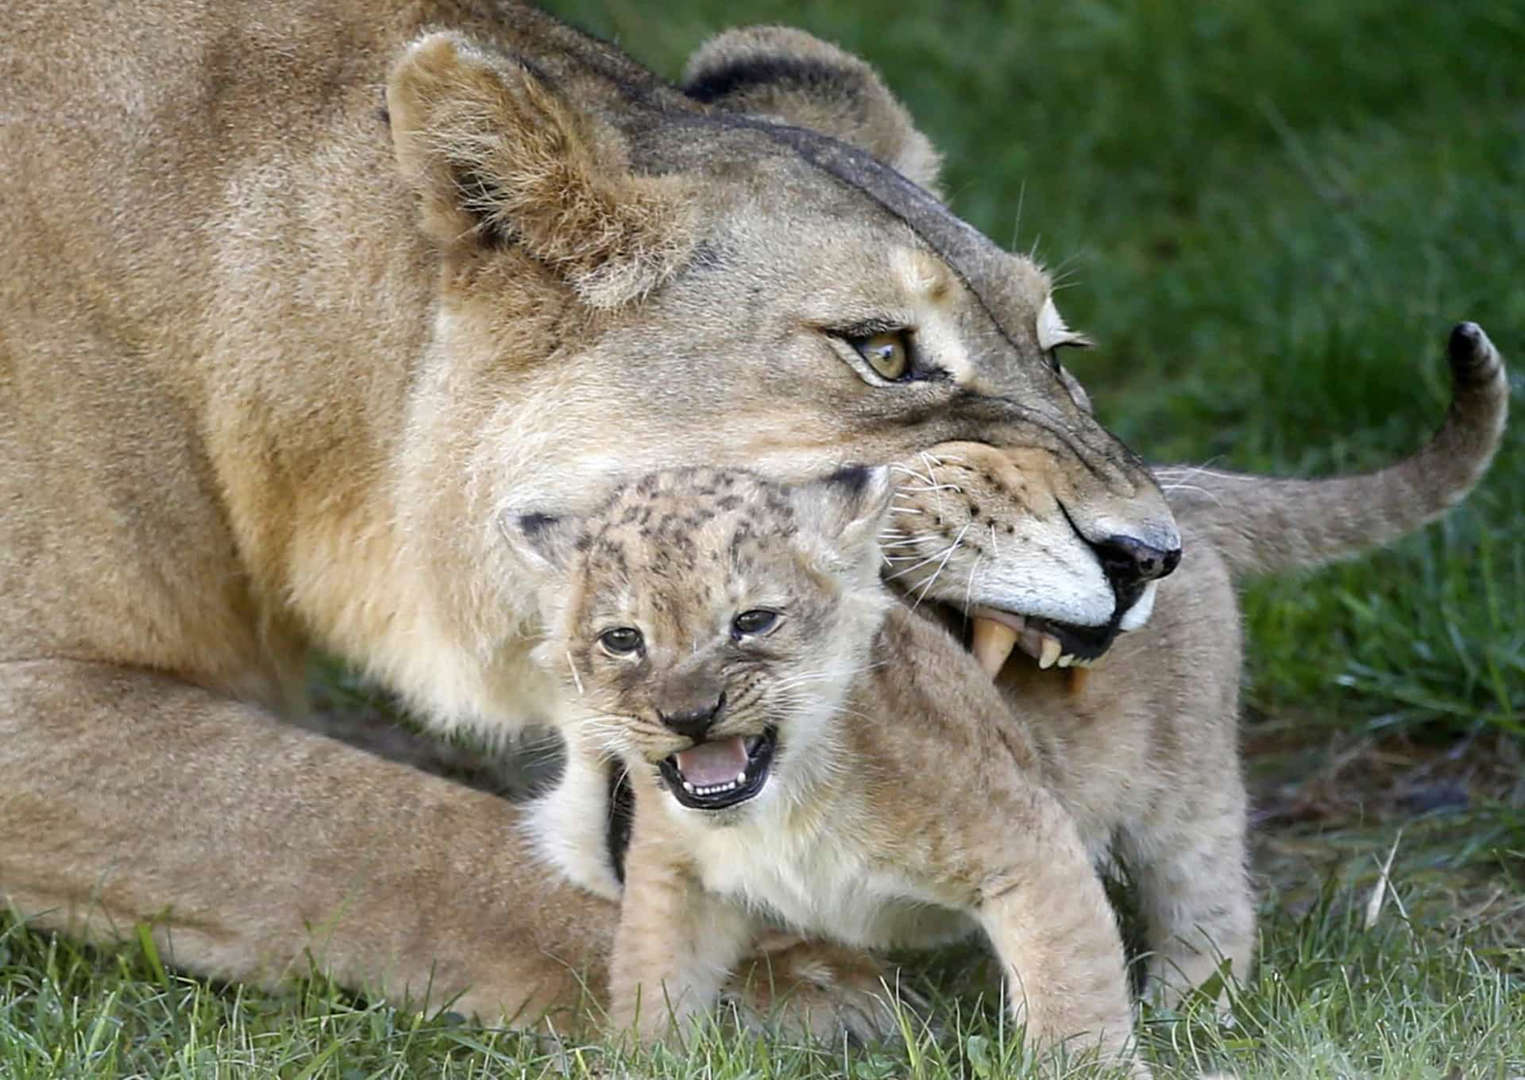 Slide 41 of 42: "That strong mother doesn’t tell her cub, Son, stay weak so the wolves can get you. She says, Toughen up, this is reality we are living in." - Lauryn Hill